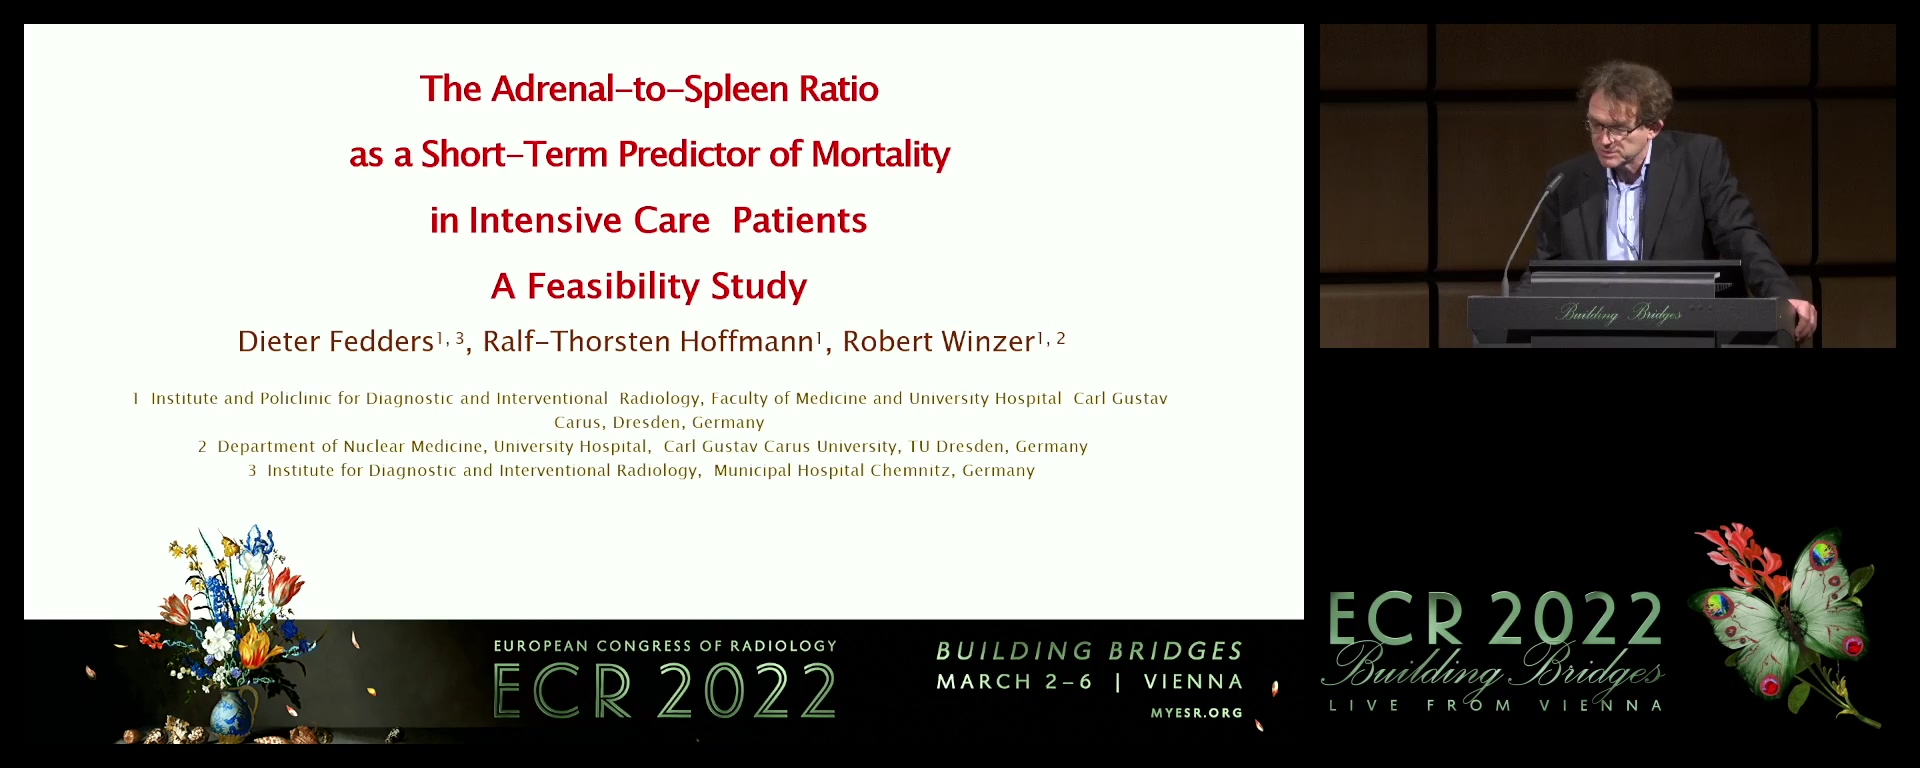 The adrenal-to-spleen ratio as a short-term predictor of mortality in intensive care patients: a feasibility study - Dieter Fedders, Chemnitz / DE